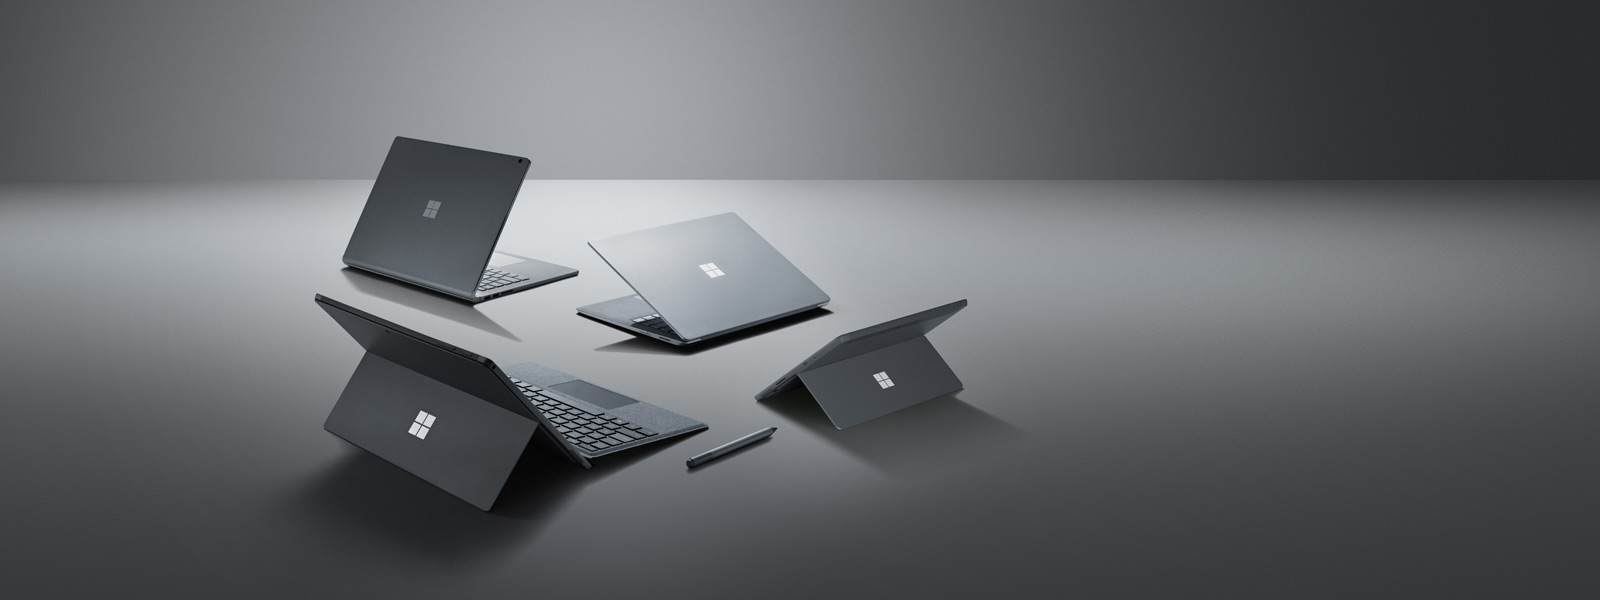 Surface family of computers with Surface Pen